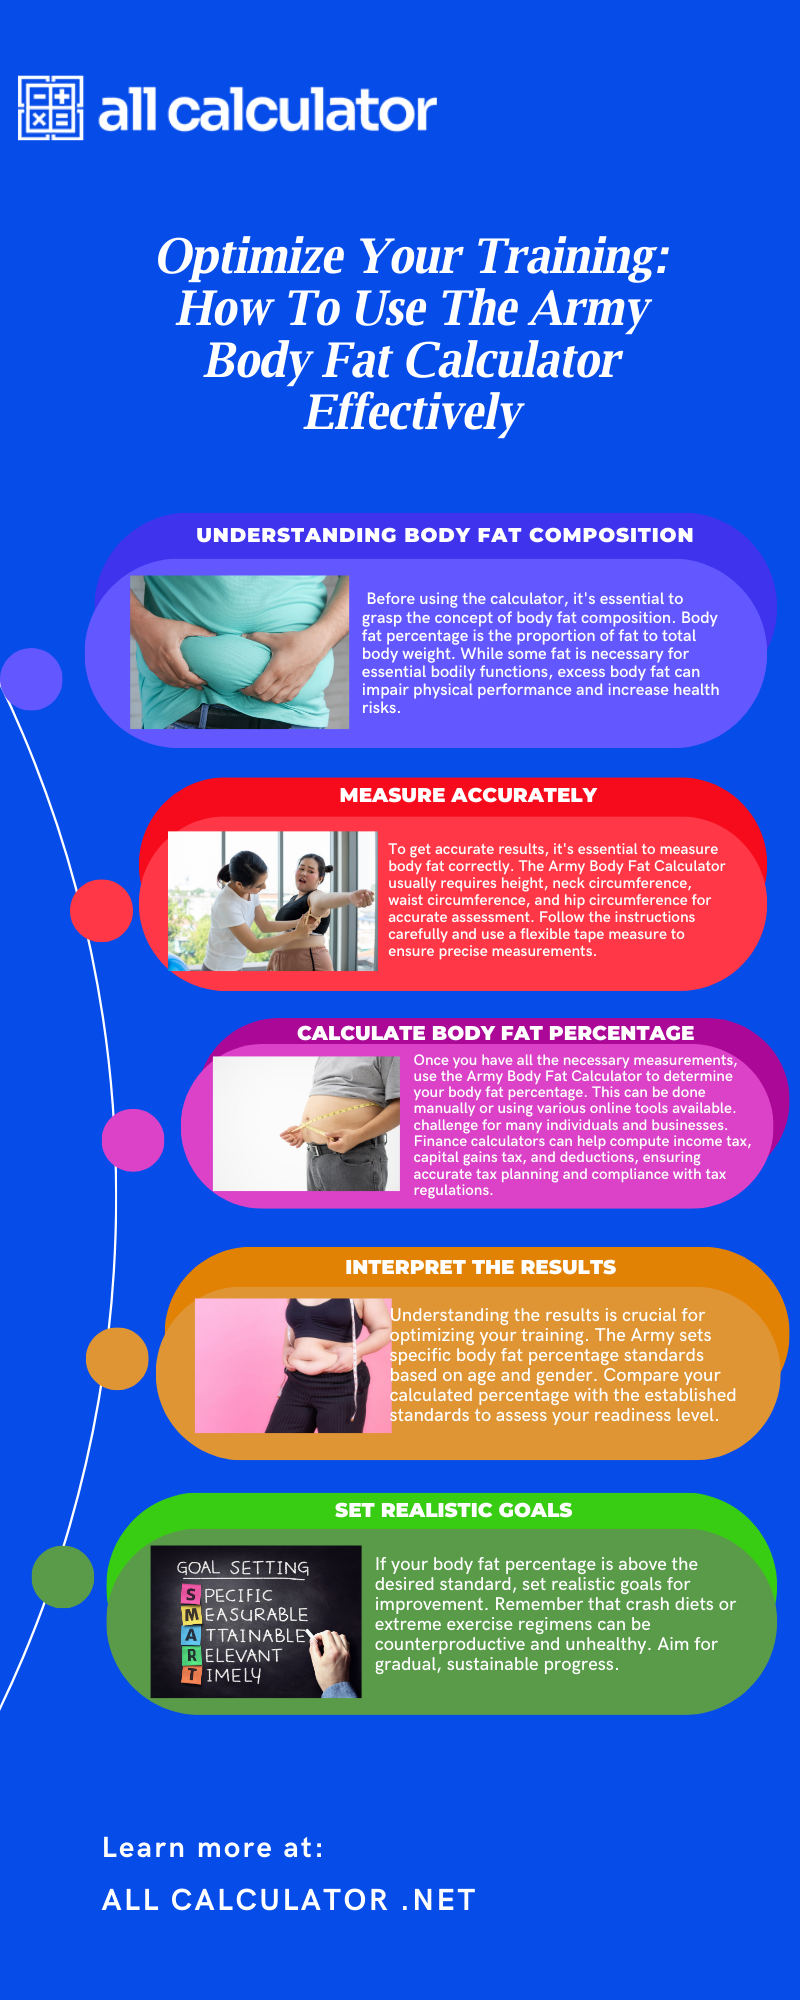 Which is the Most Accurate Body Fat Calculator / Measurement